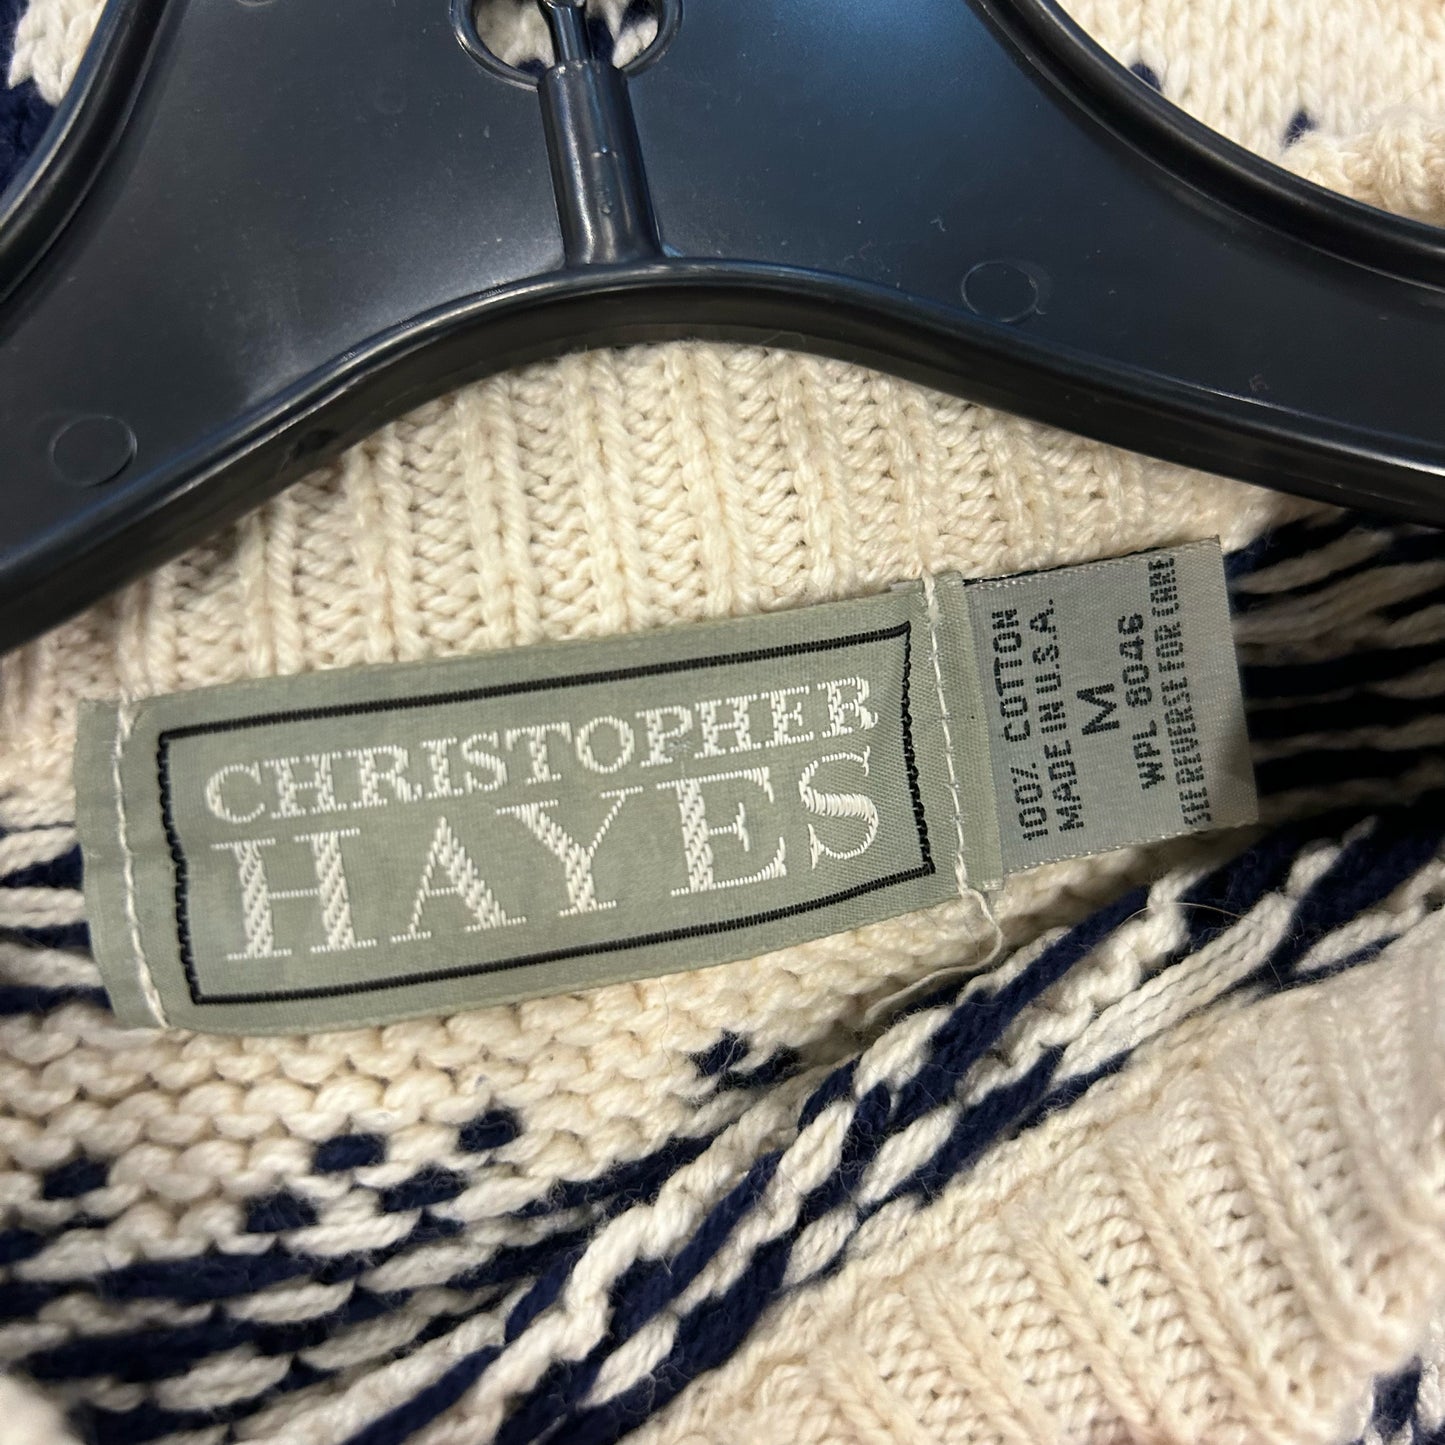 M Christopher Hayes White-Blue Pattern Sweater